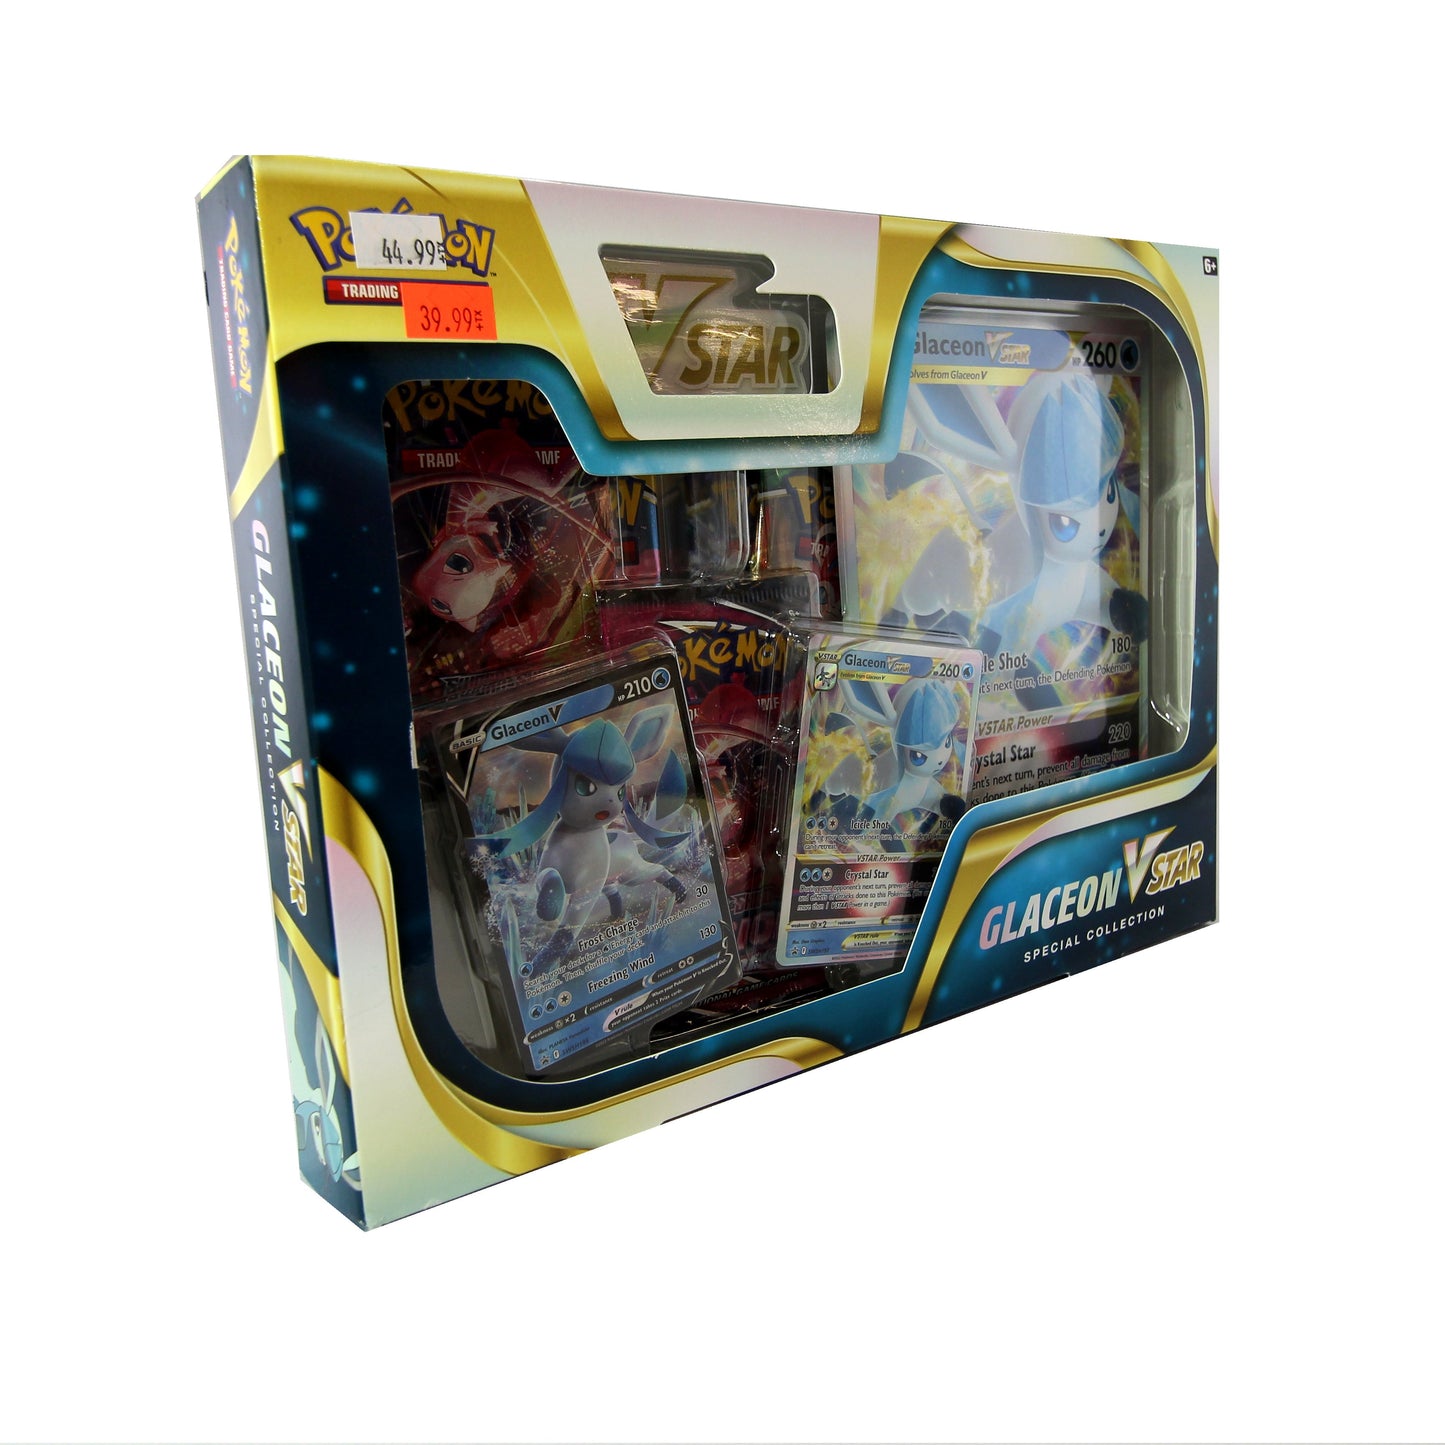 Pokémon Glaceon V Star Special Collection Gift Box